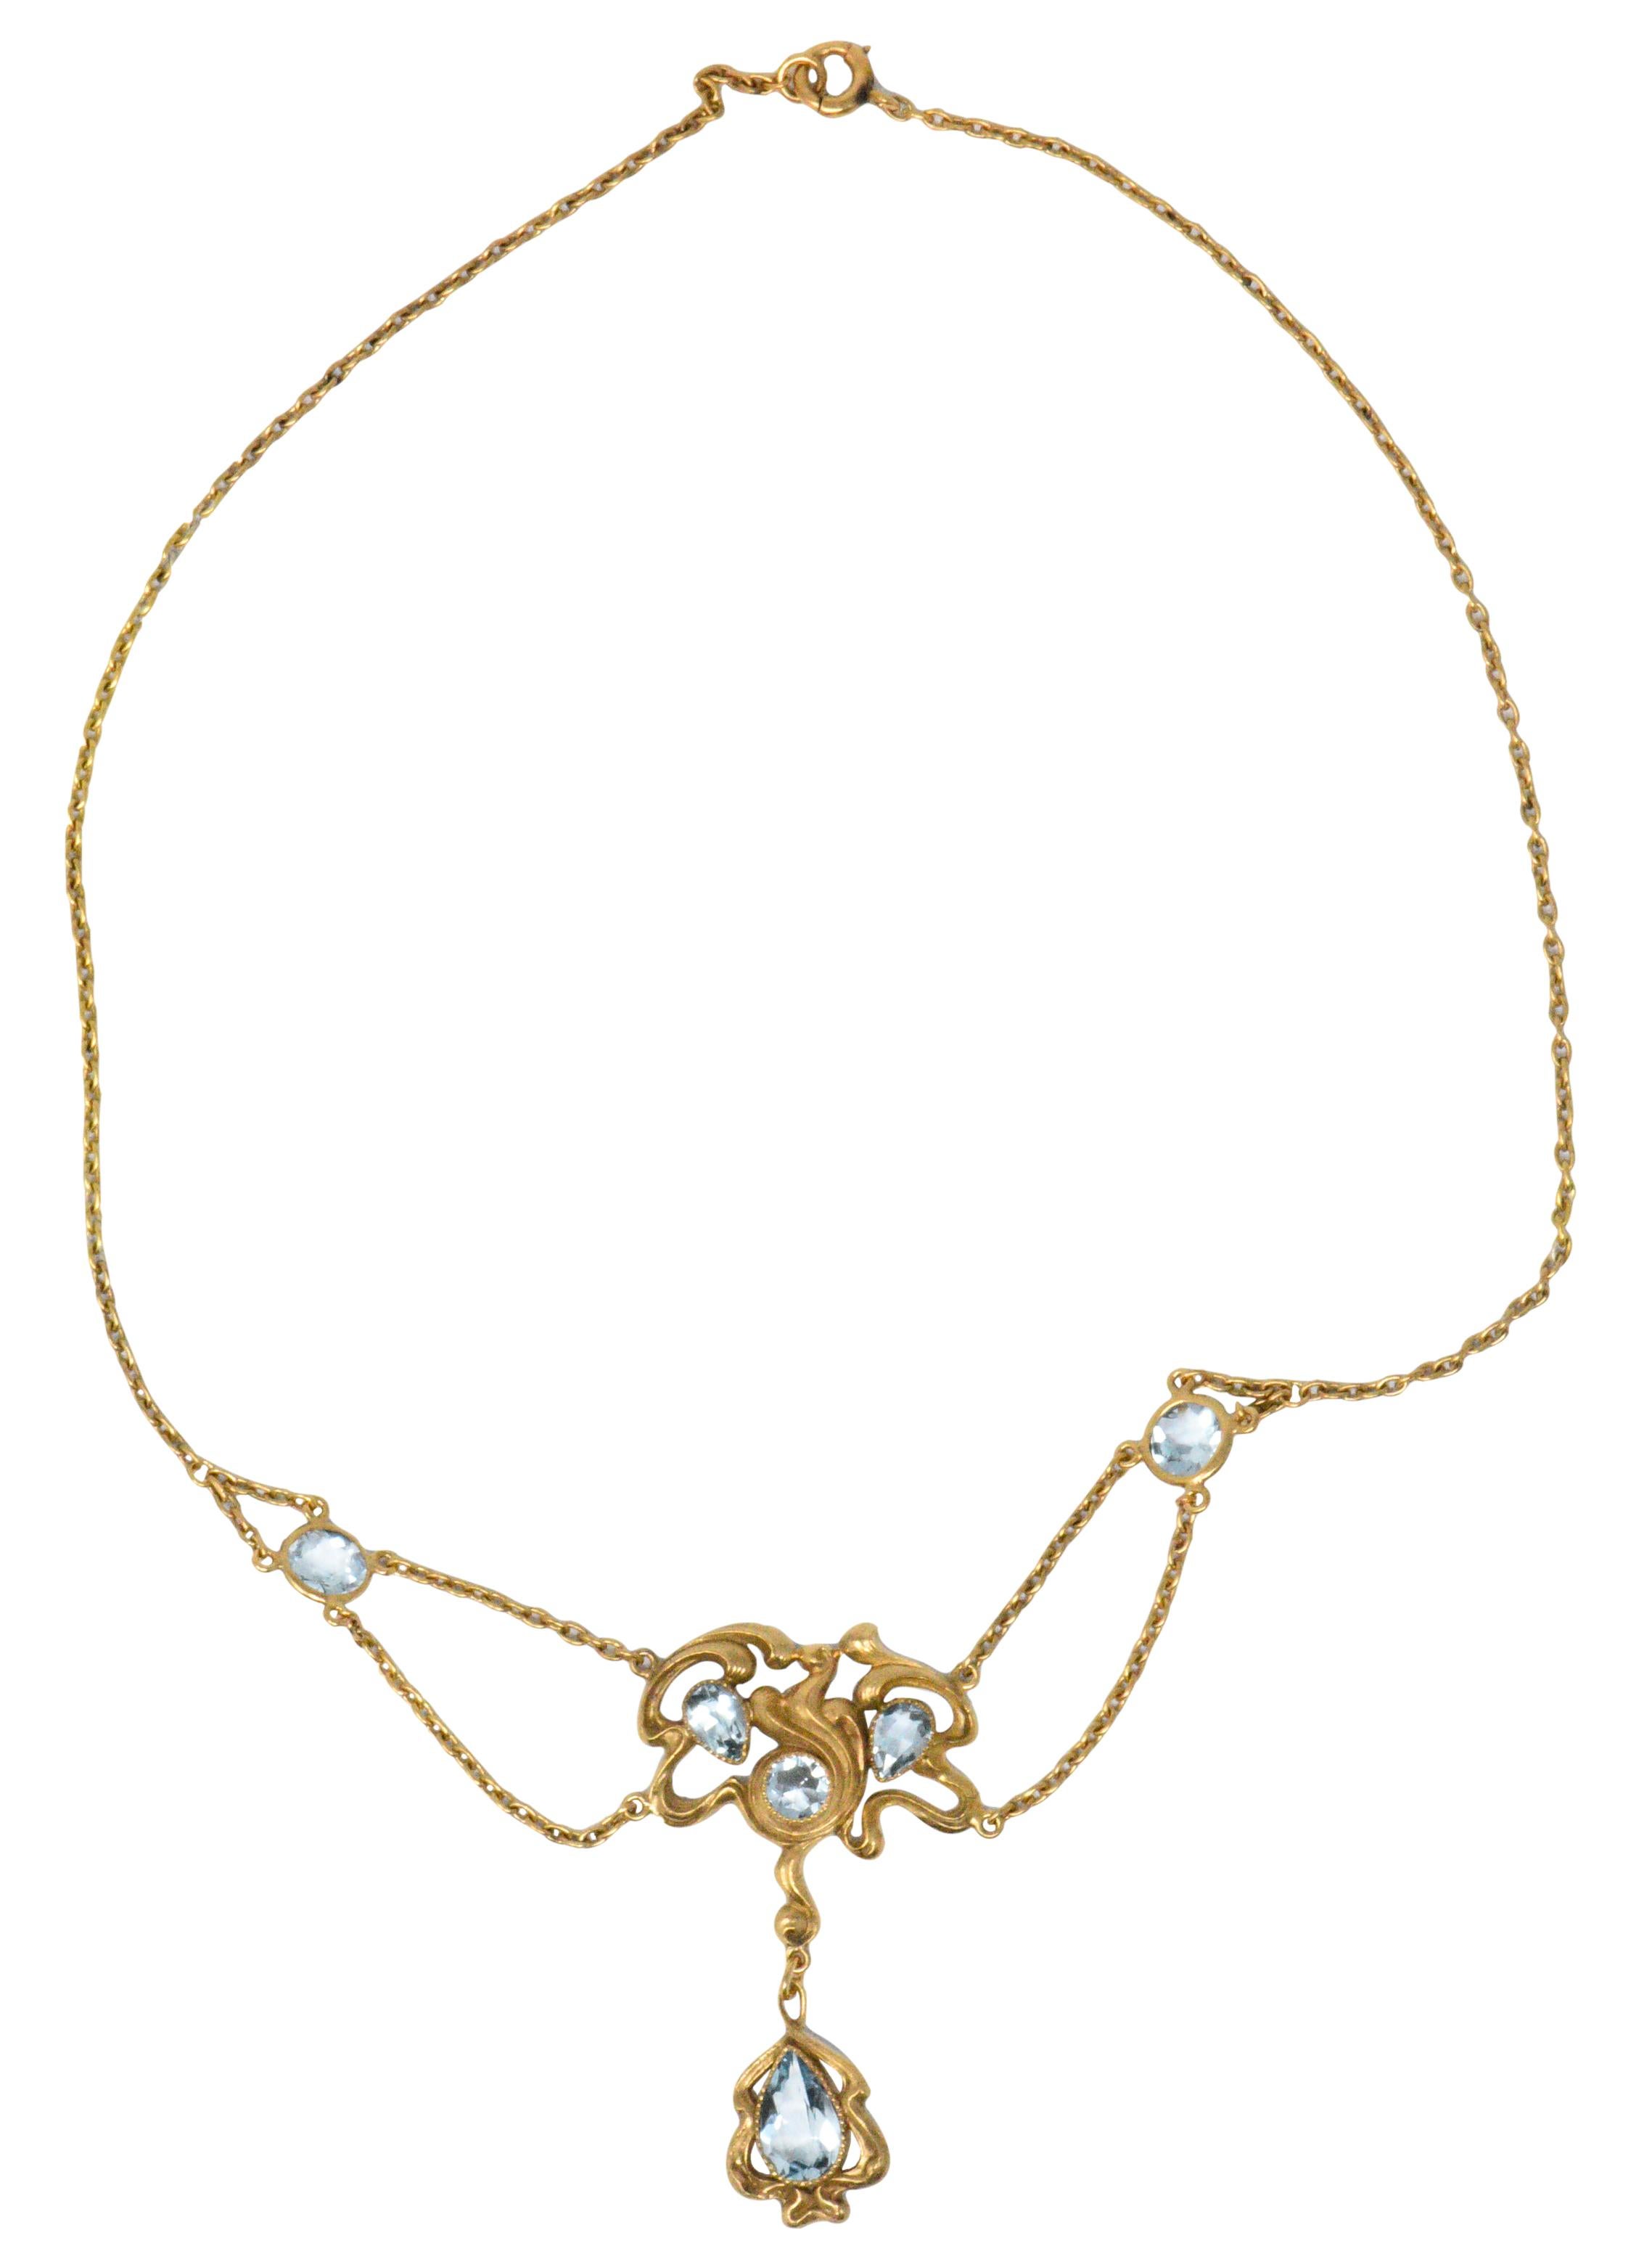 Swag style necklace with rose cut round and pear shaped aquamarines

Centering a free-form flowing gold, referred to as the 